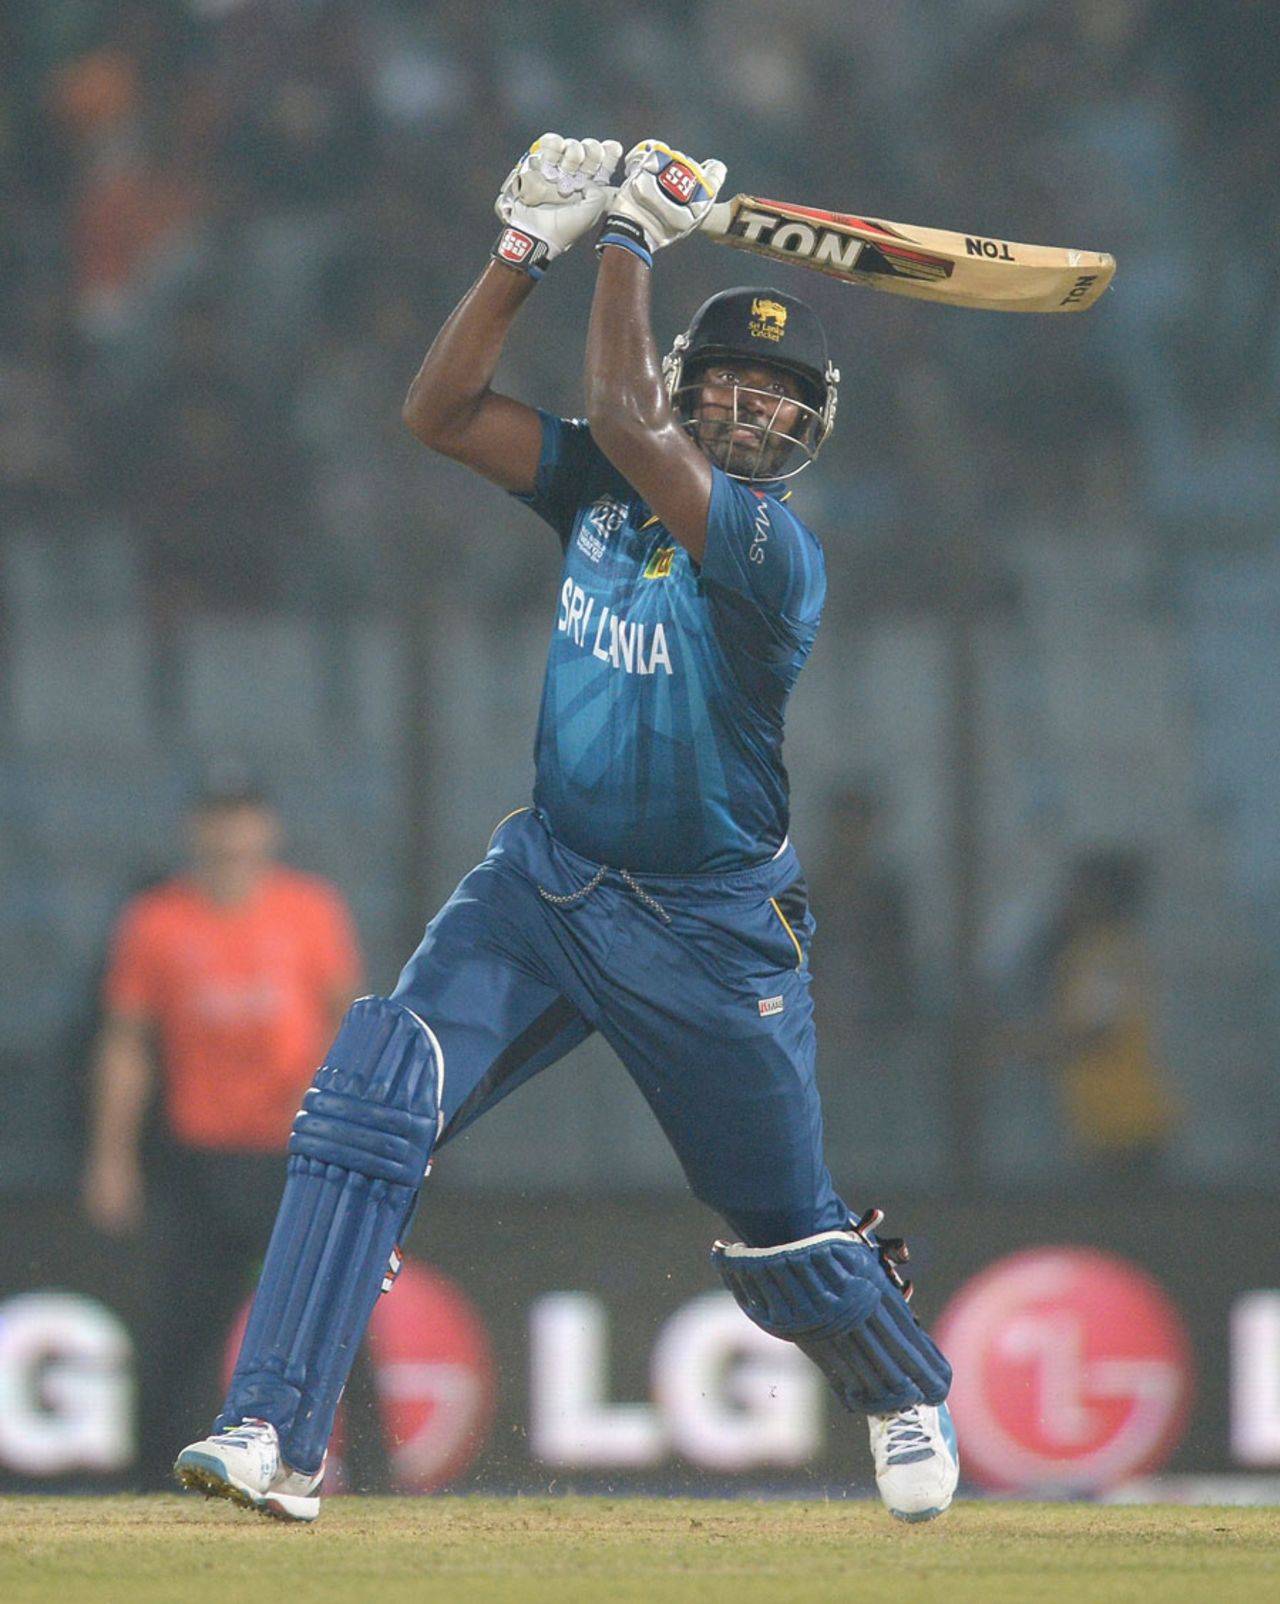 Thisara Perera swung to good effect late in the innings, England v Sri Lanka, World T20, Group 1, Chittagong, March, 27, 2014